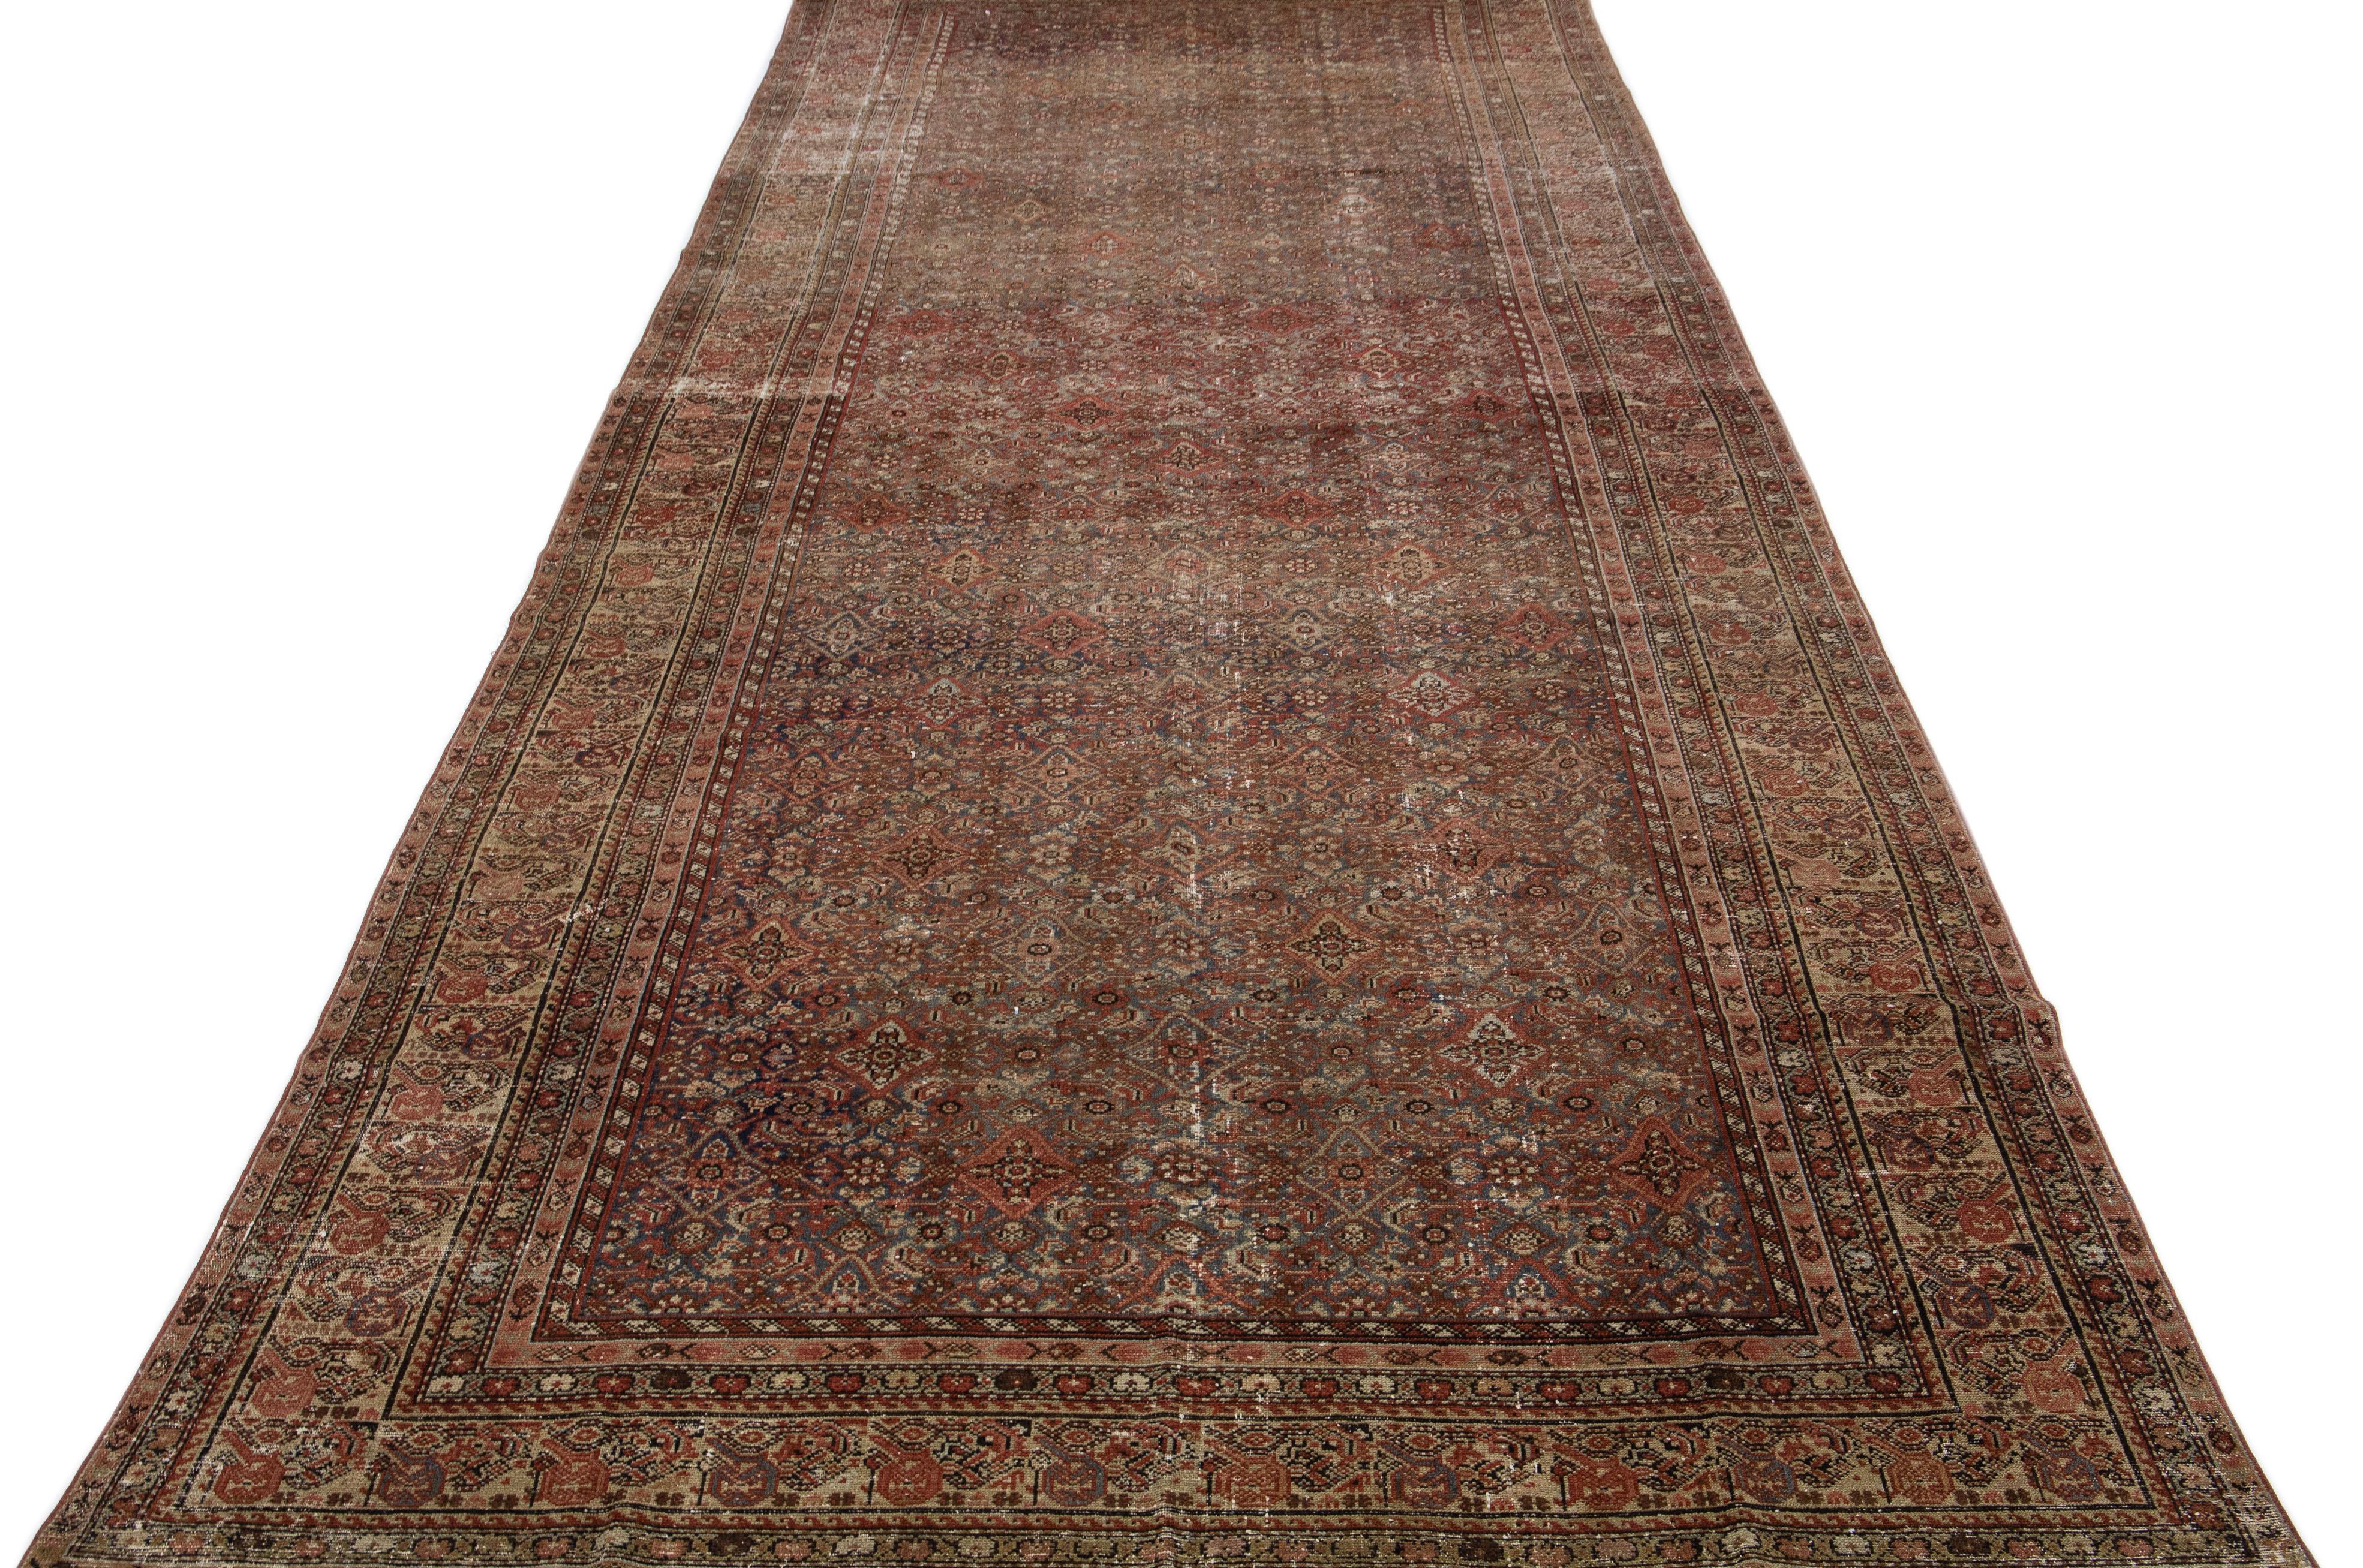 Beautiful antique Malayer hand-knotted wool rug with a blue color field. This Persian rug has rust accents in a gorgeous traditional allover floral design.

This rug measures 7'1